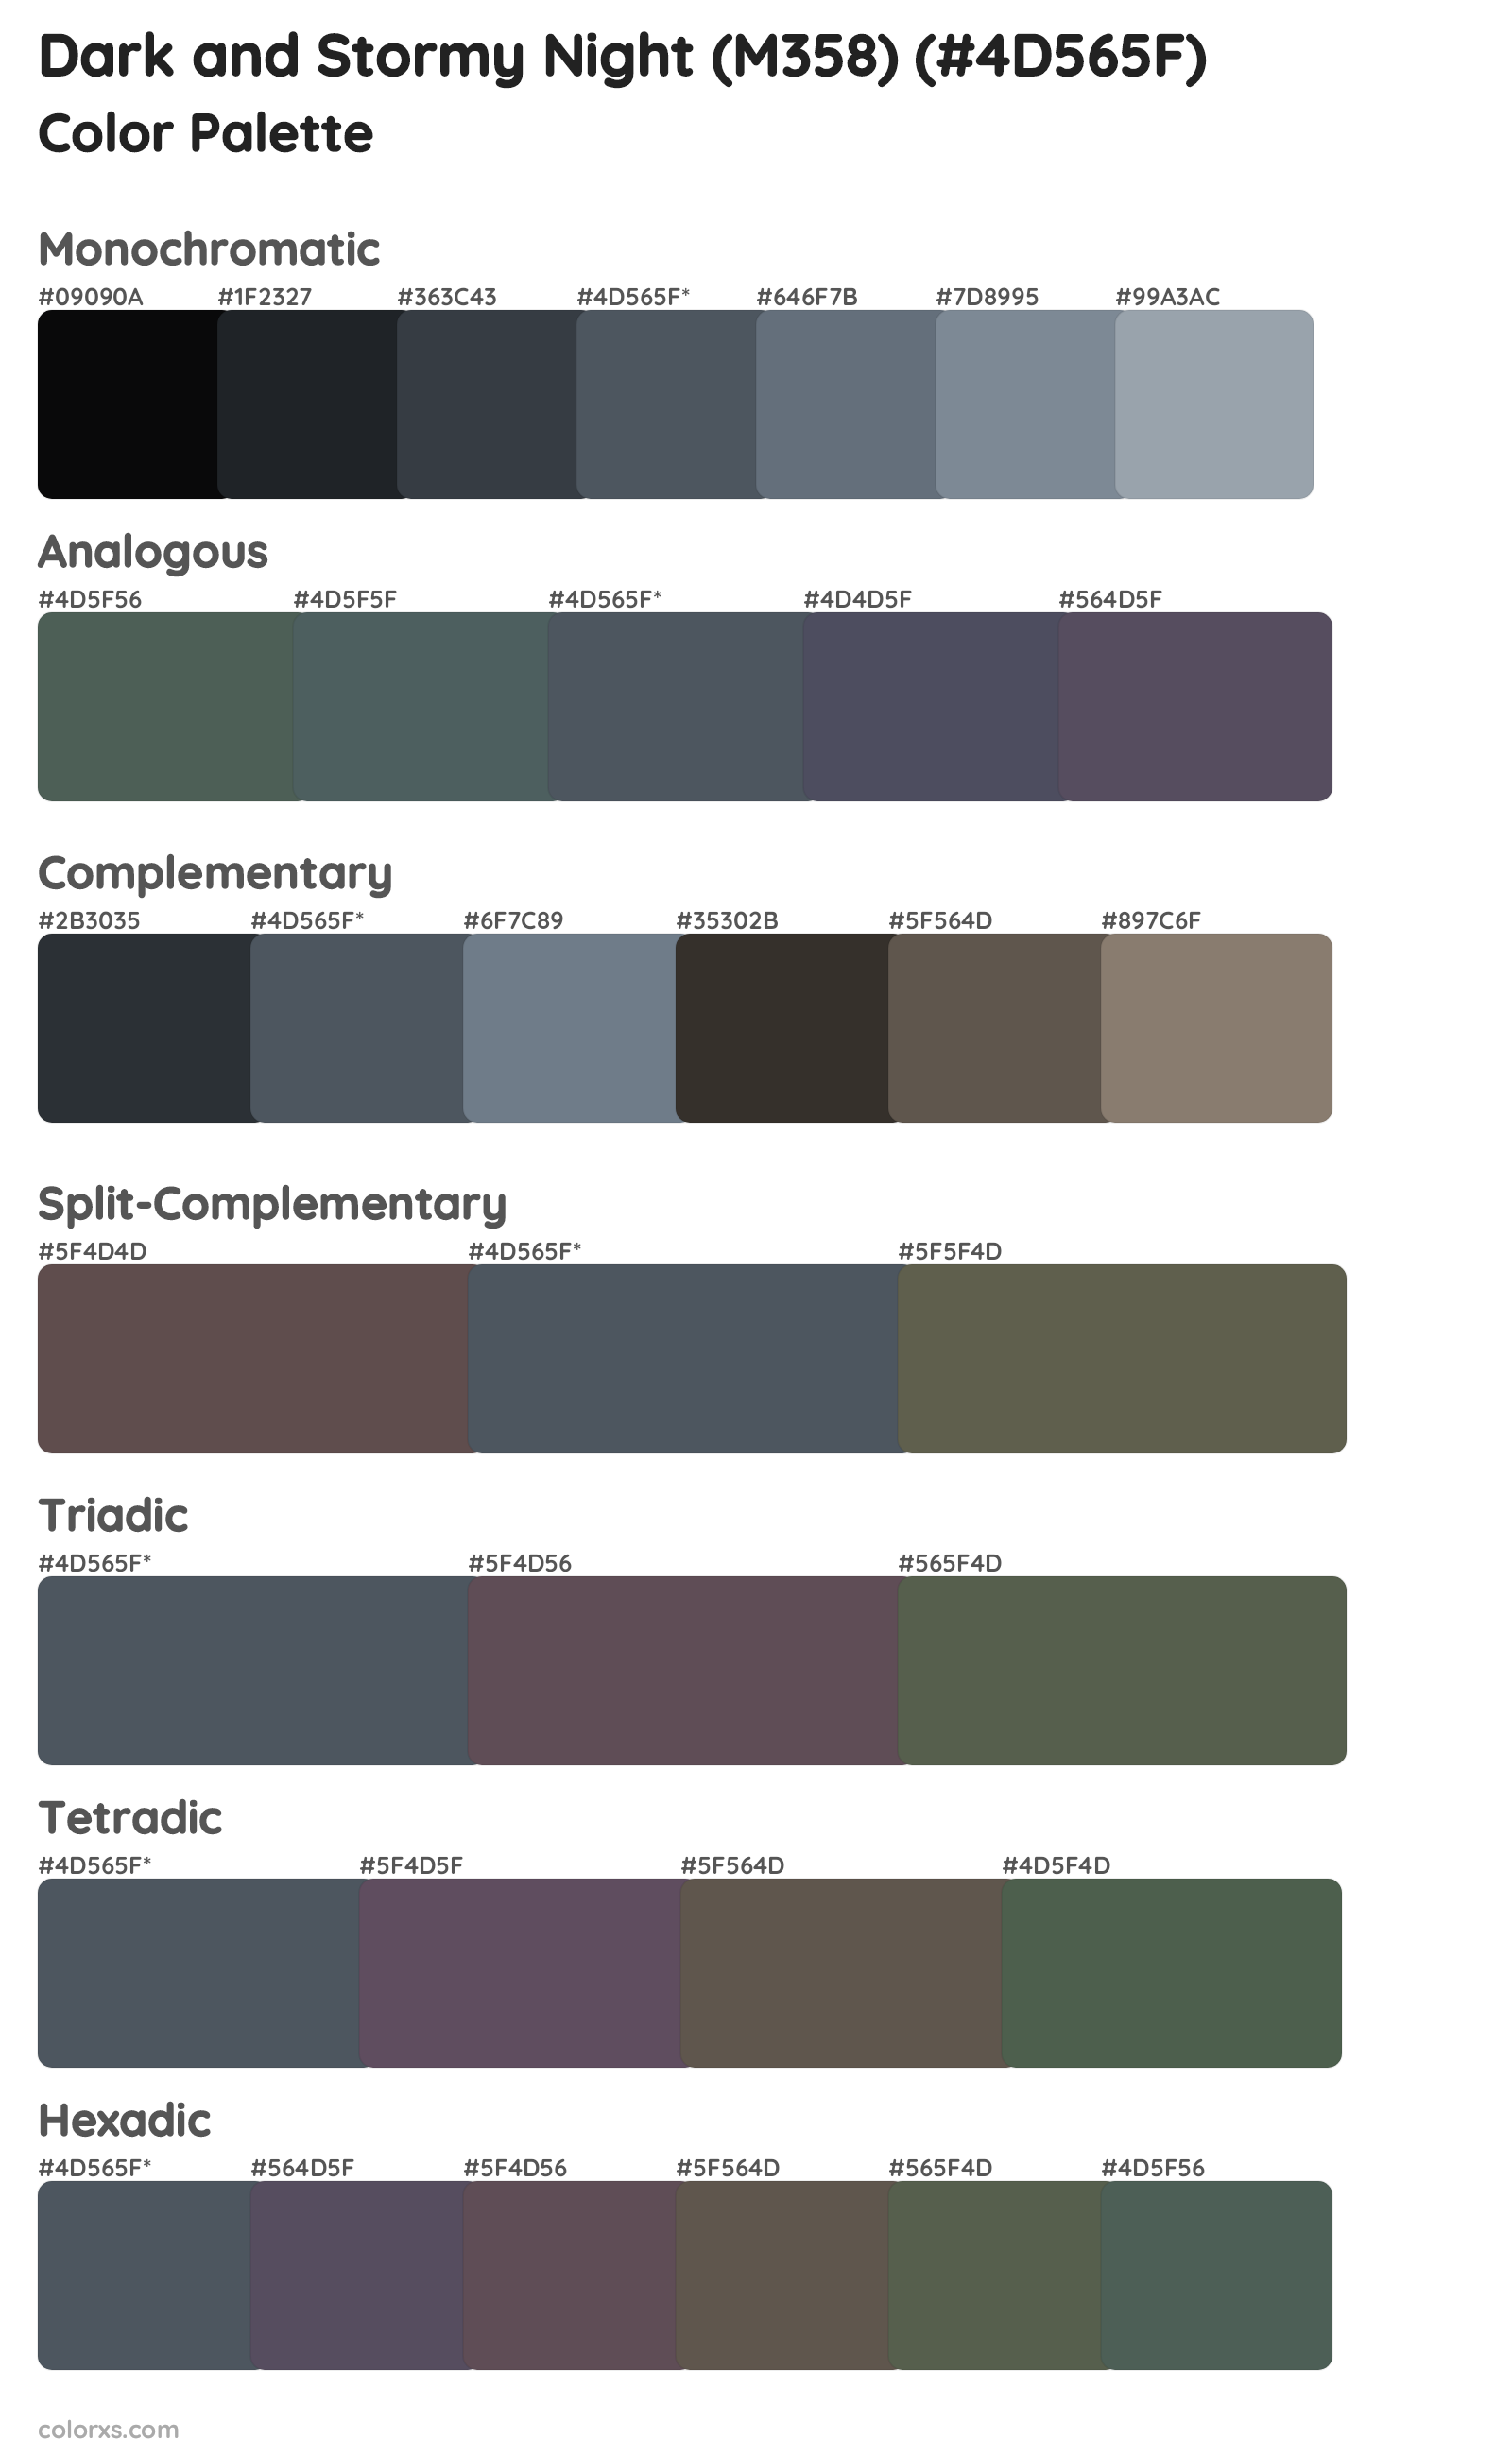 Dark and Stormy Night (M358) Color Scheme Palettes